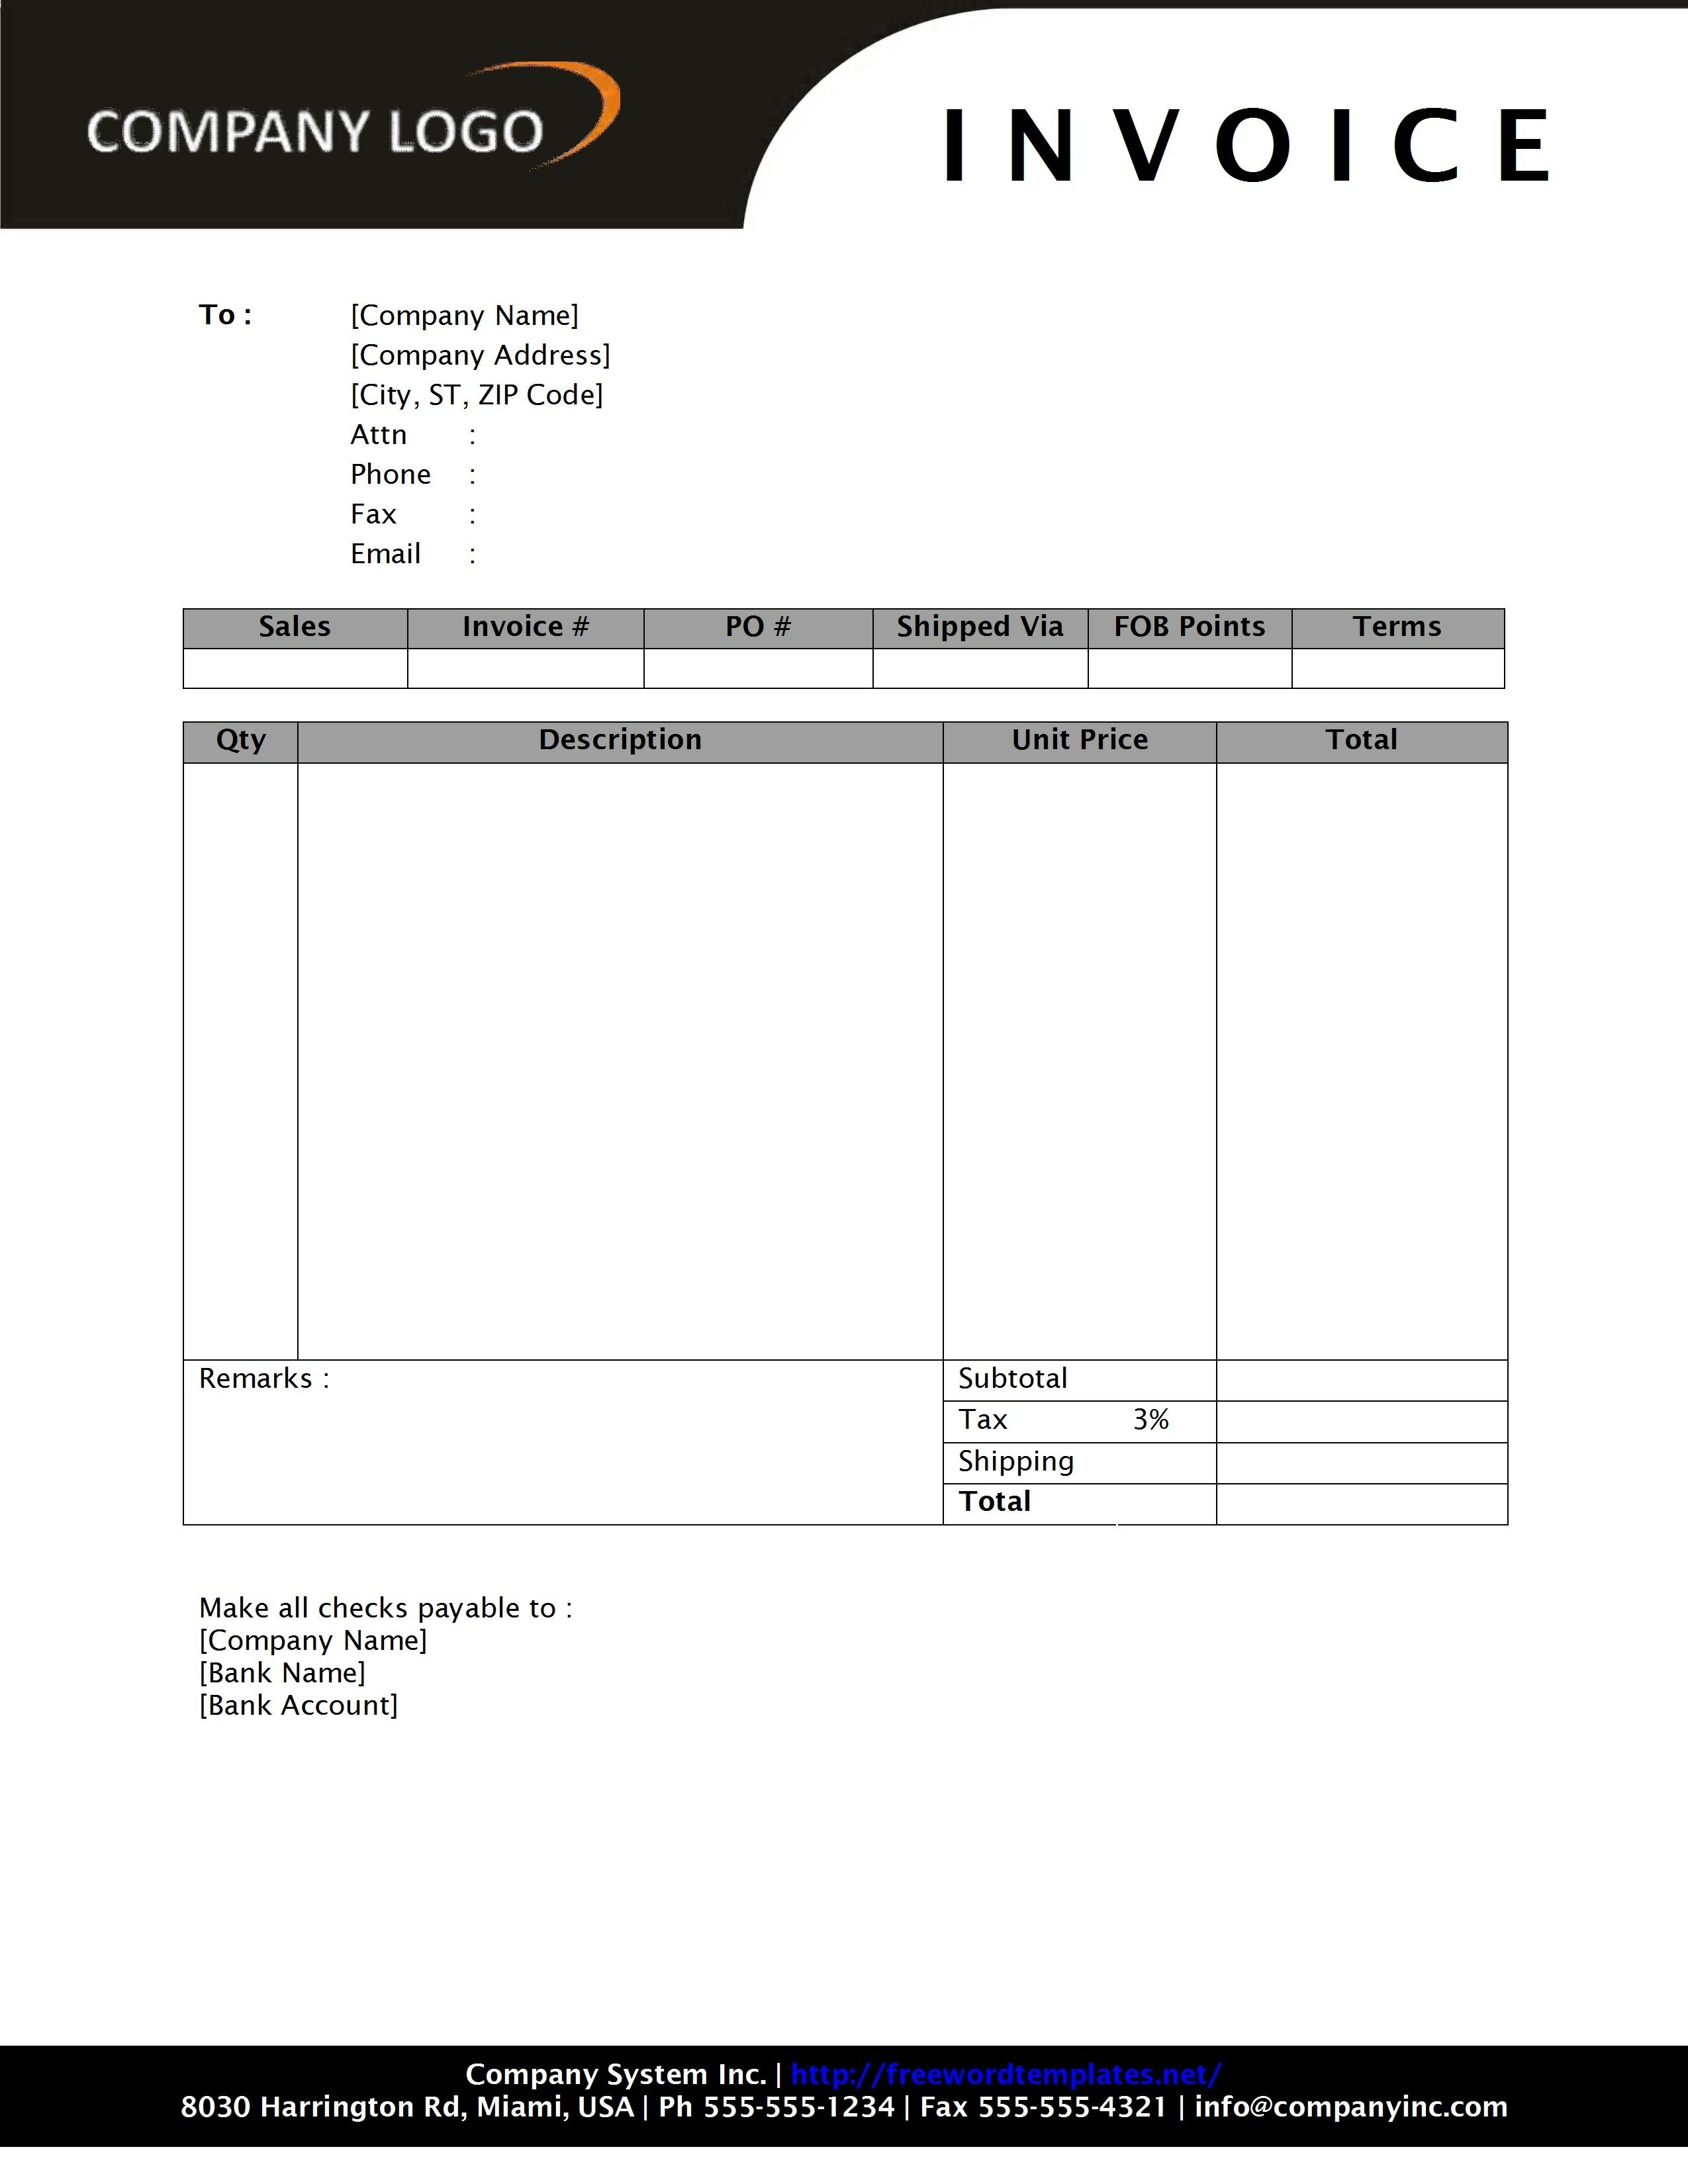 microsoft word invoice template free download invoice template microsoft word invoice template download